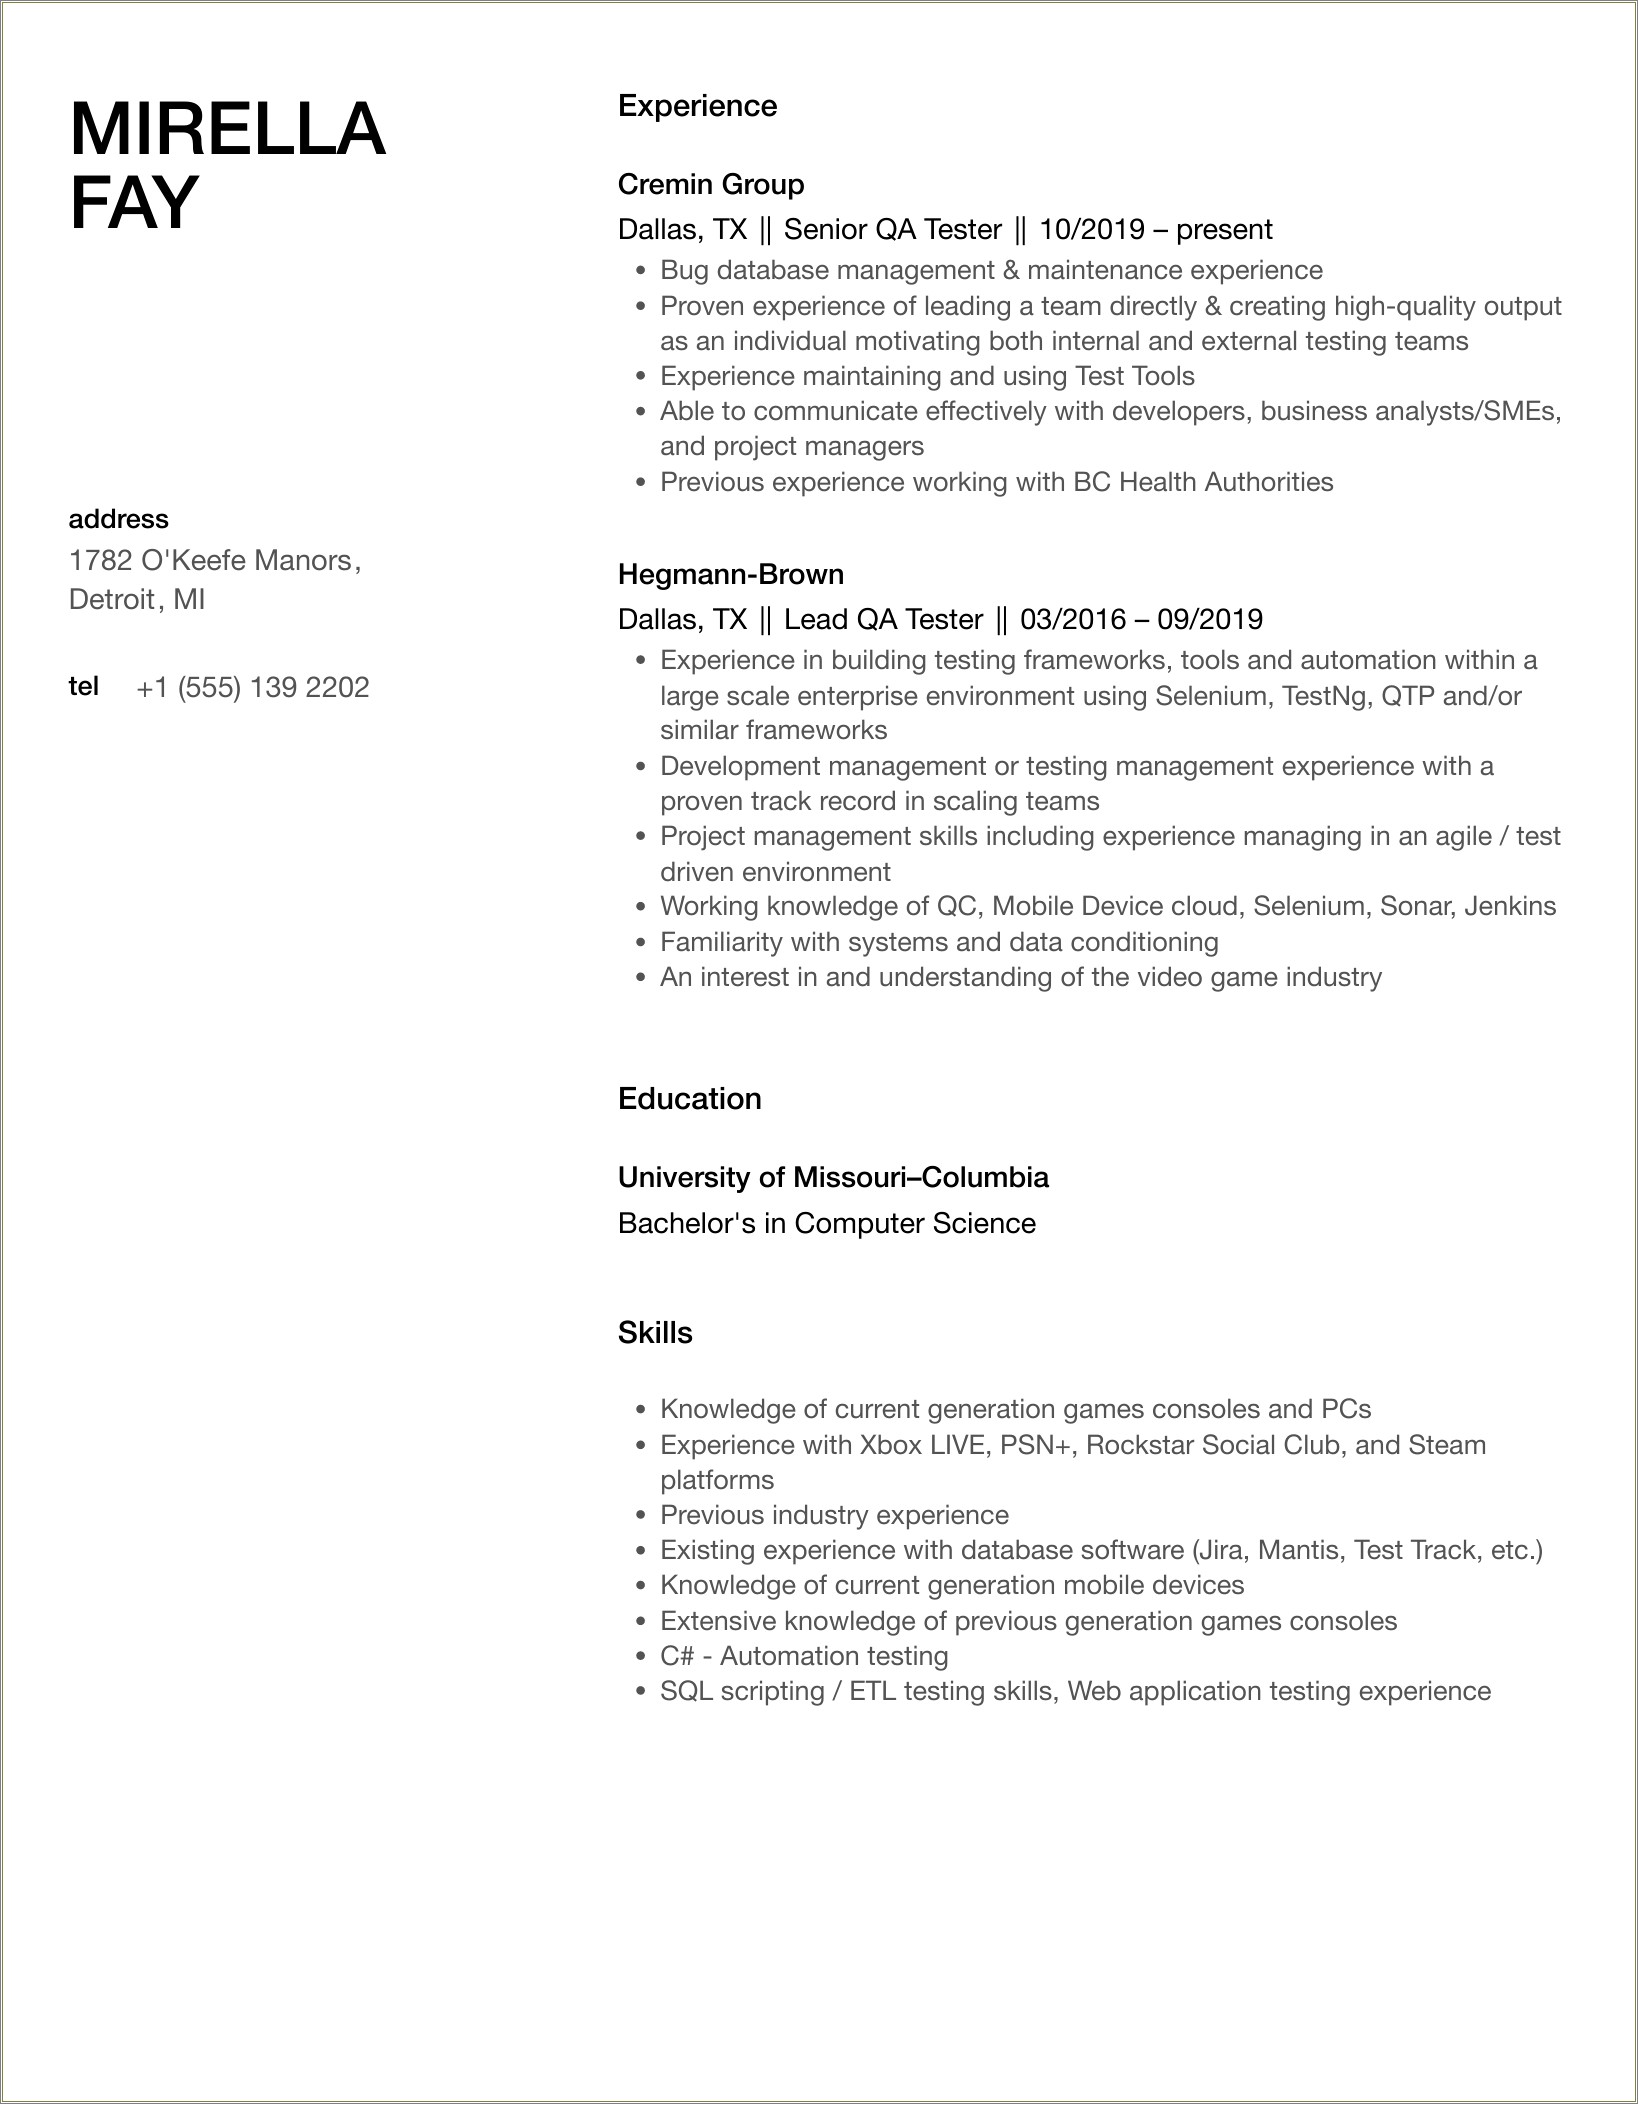 Etl Testing Resume With Experience In Healthcare